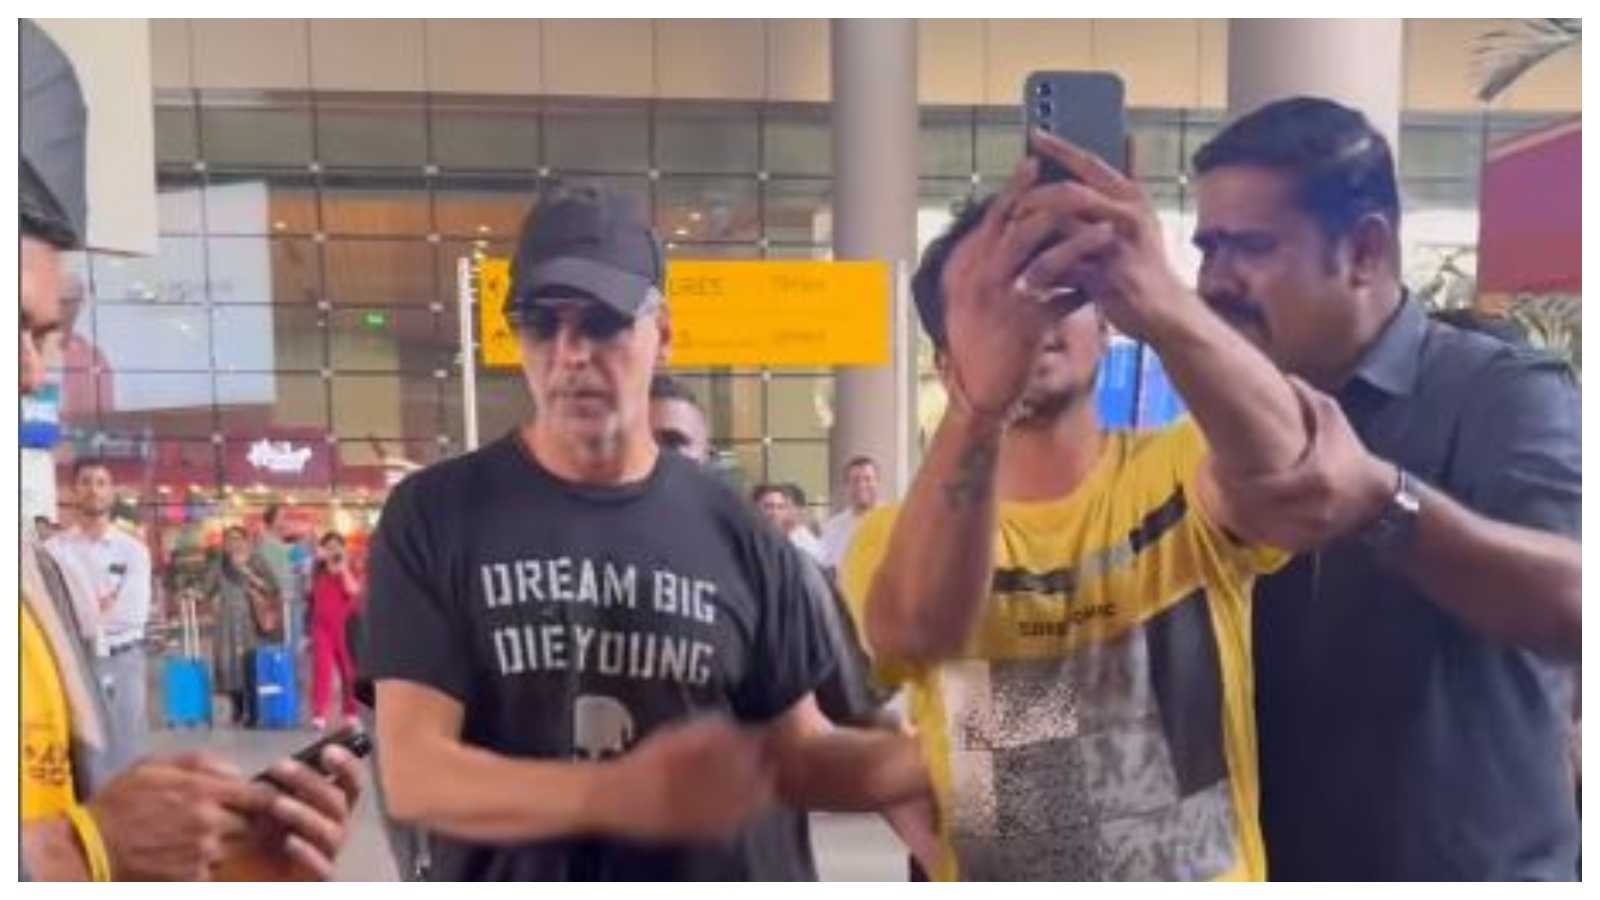 'He is so humble': Akshay Kumar wins hearts as he obliges fans with selfies at airport despite bodyguards' interference